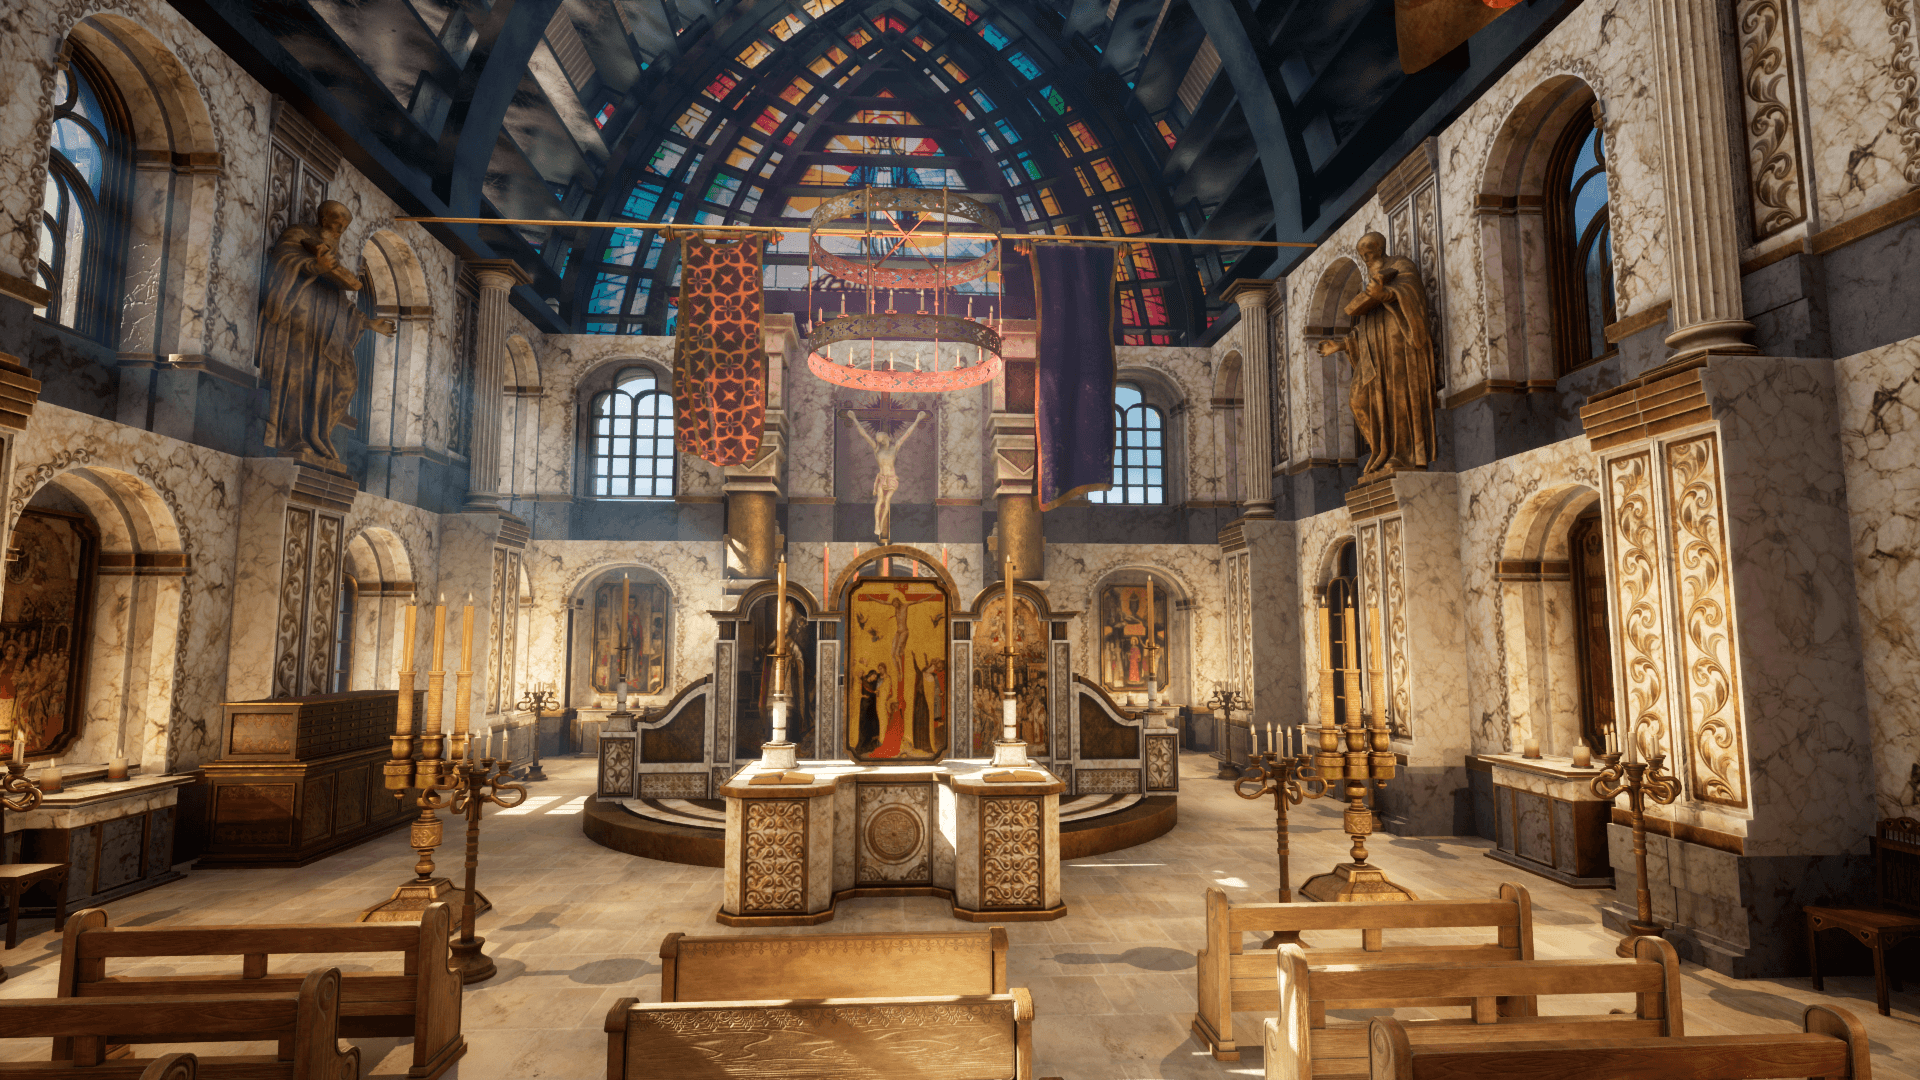 An image showing the Cathedral 3. asset pack, created with Unreal Engine